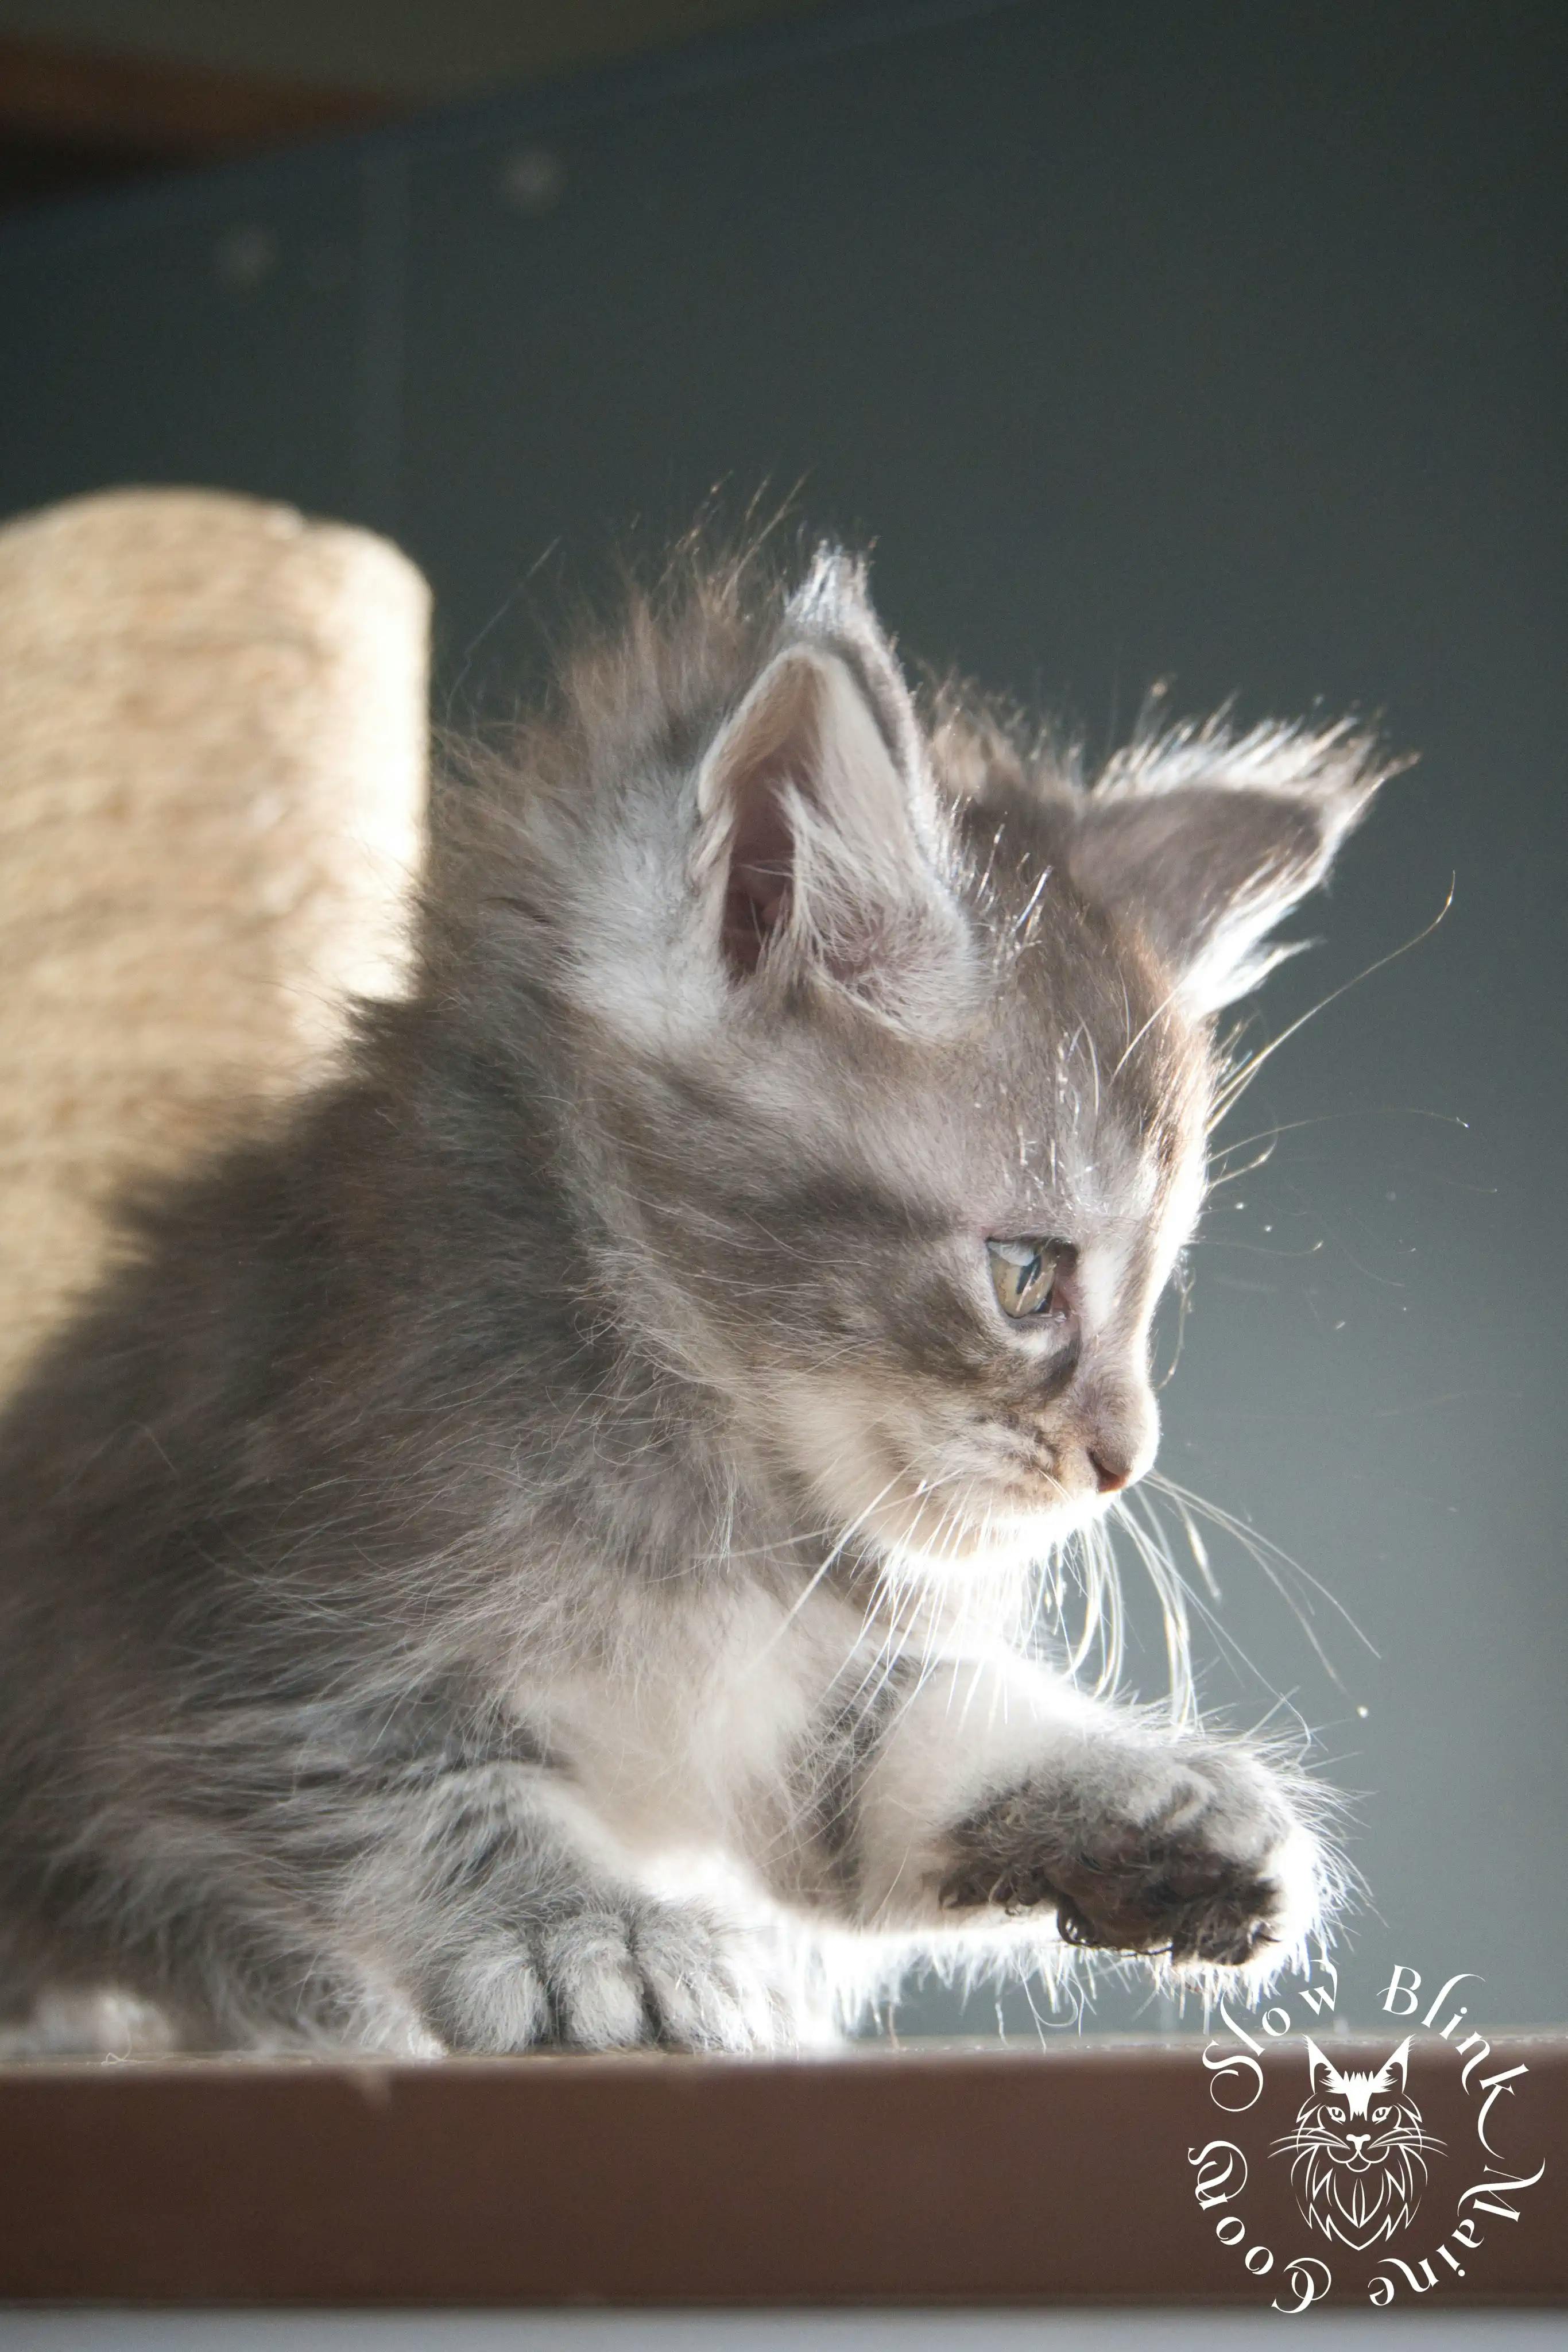 Blue Silver Tabby Maine Coon Kittens > blue silver tabby maine coon kitten | slowblinkmainecoons | 308